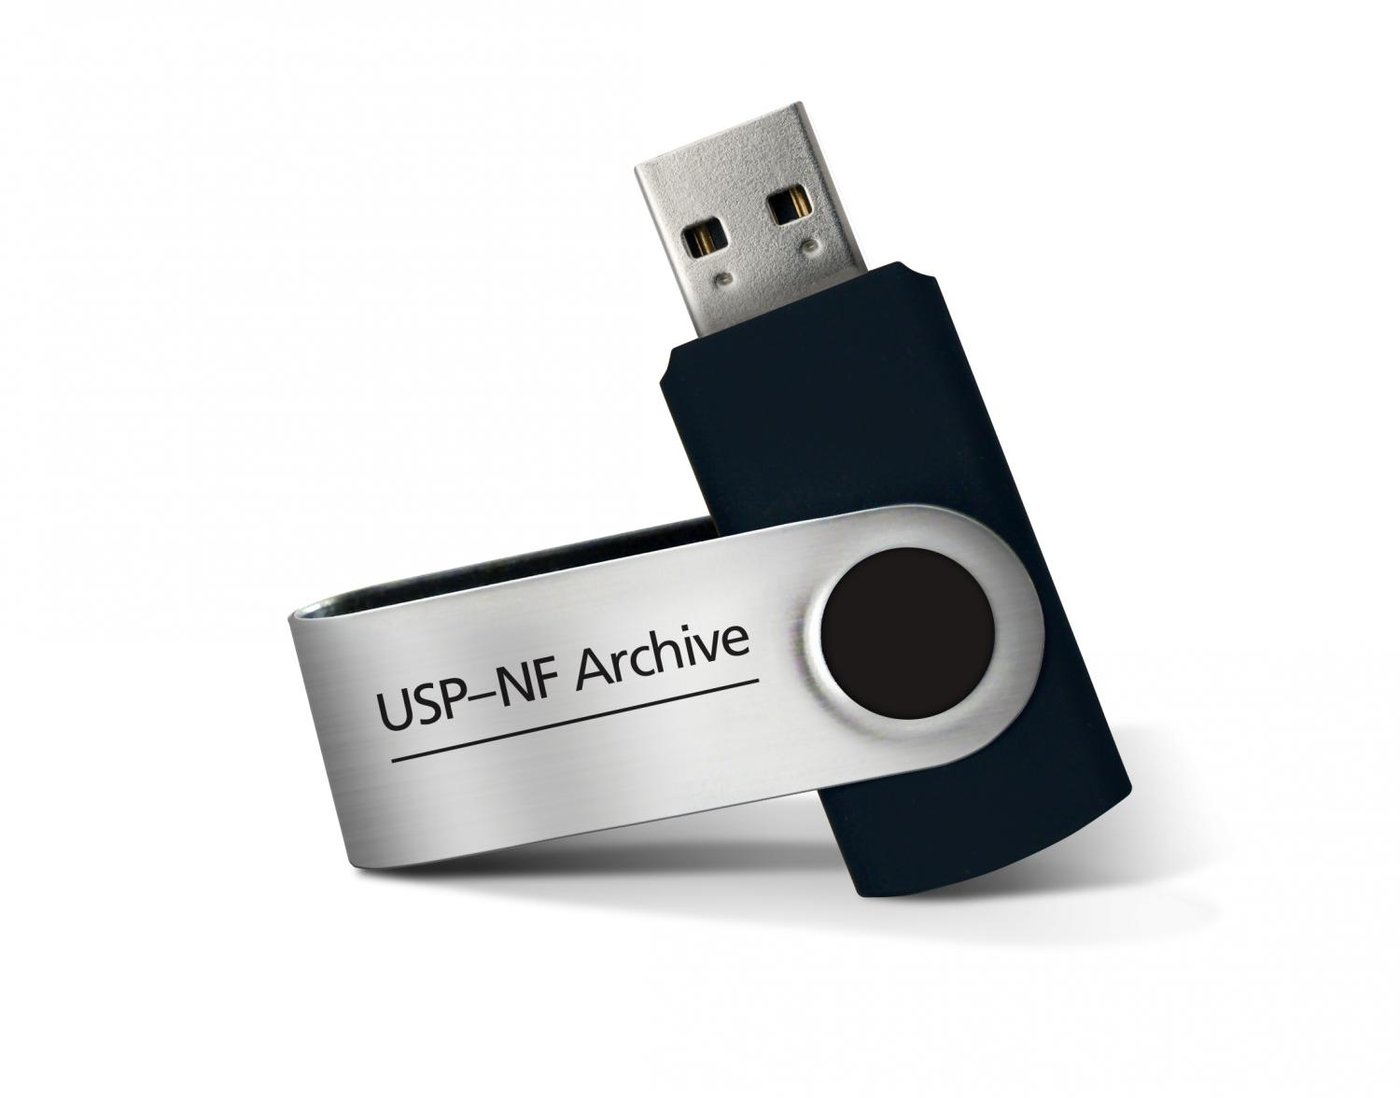 USP-NF Archive USP37-NF32
United States Pharmacopoeia and National Formulary
single user, USB-Stick